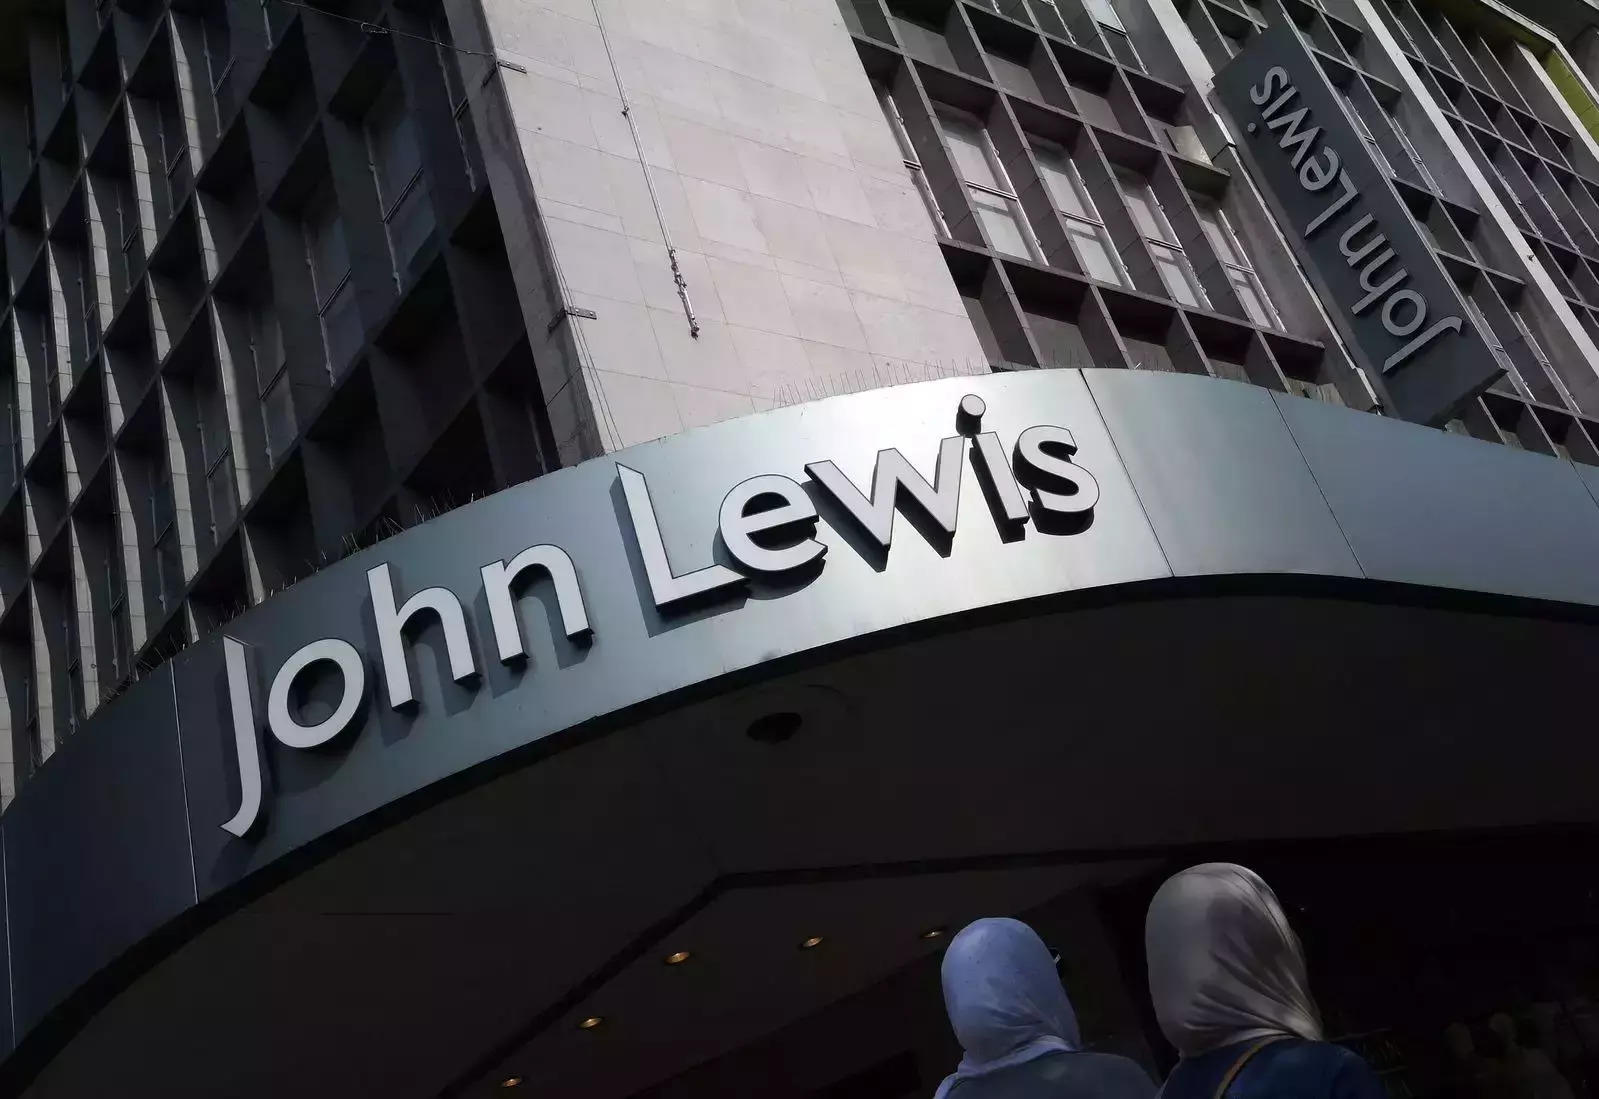 Britain's John Lewis appoints Nish Kankiwala to new CEO role